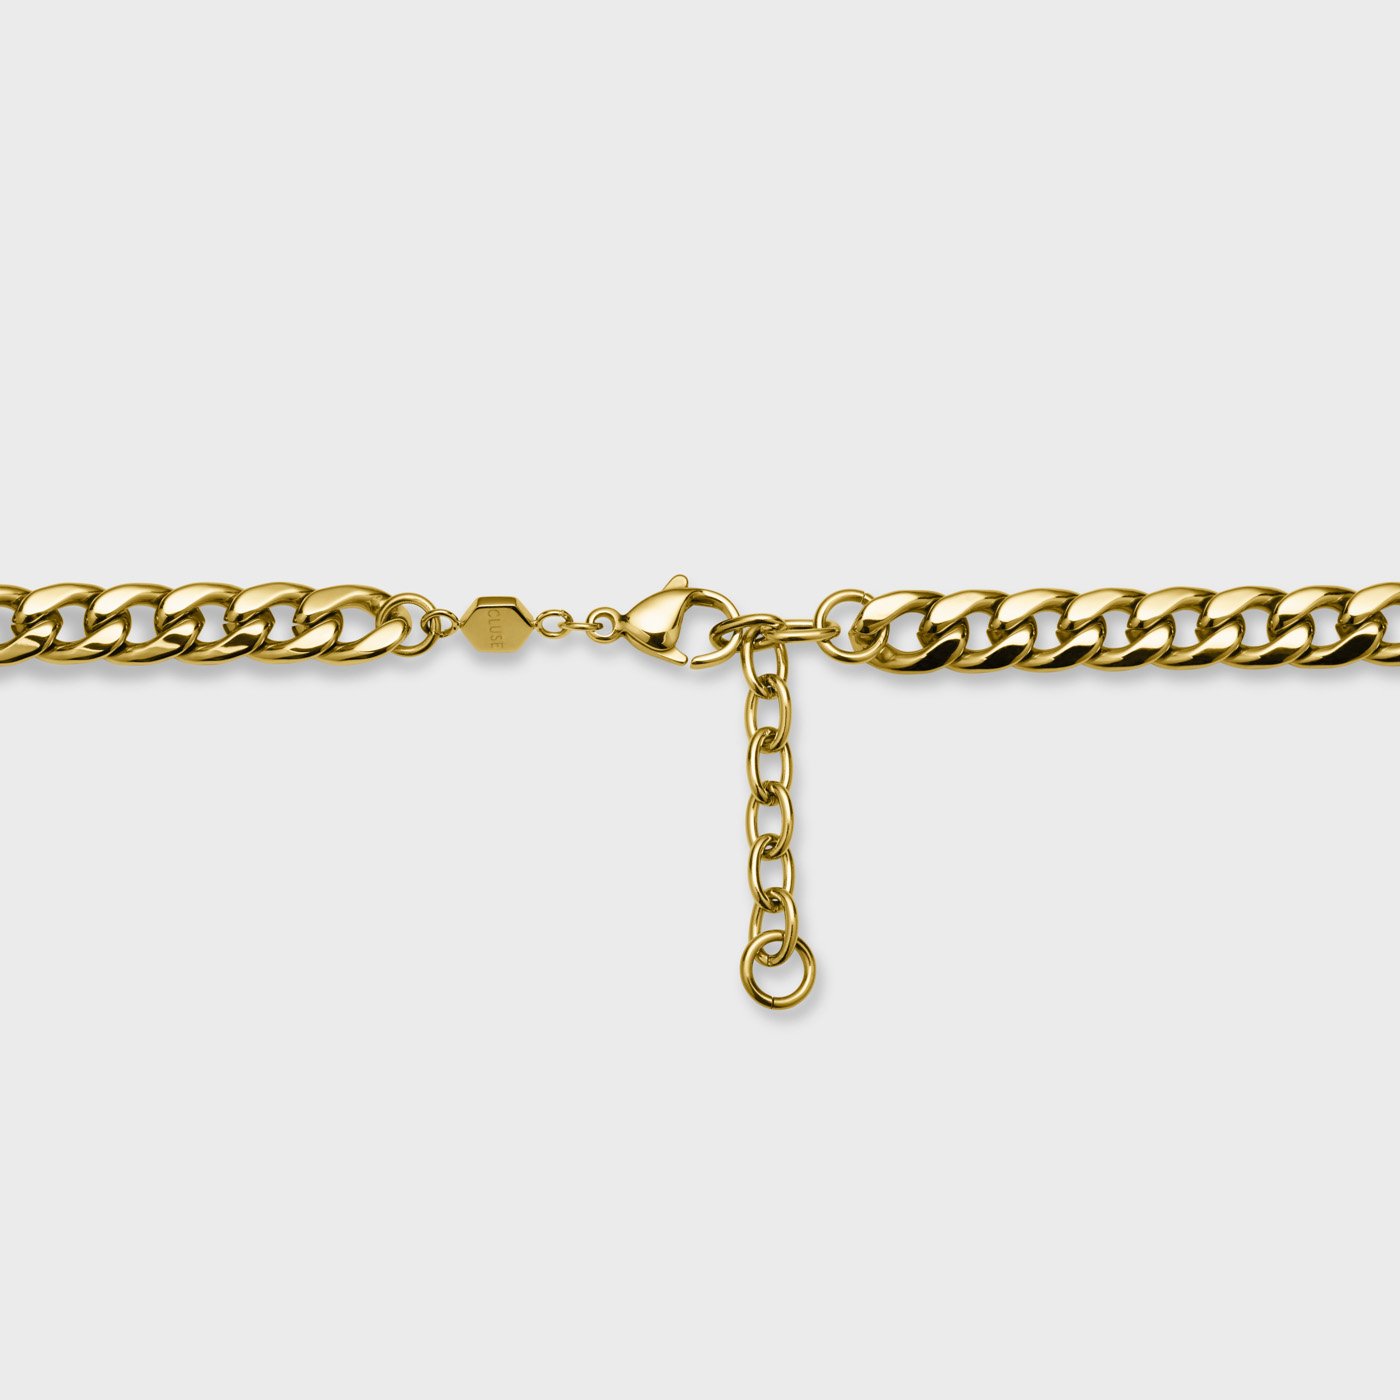 Made in Italy Men's 6.0mm Diamond-Cut Curb Chain Necklace in Hollow 10K  Two-Tone Gold - 22